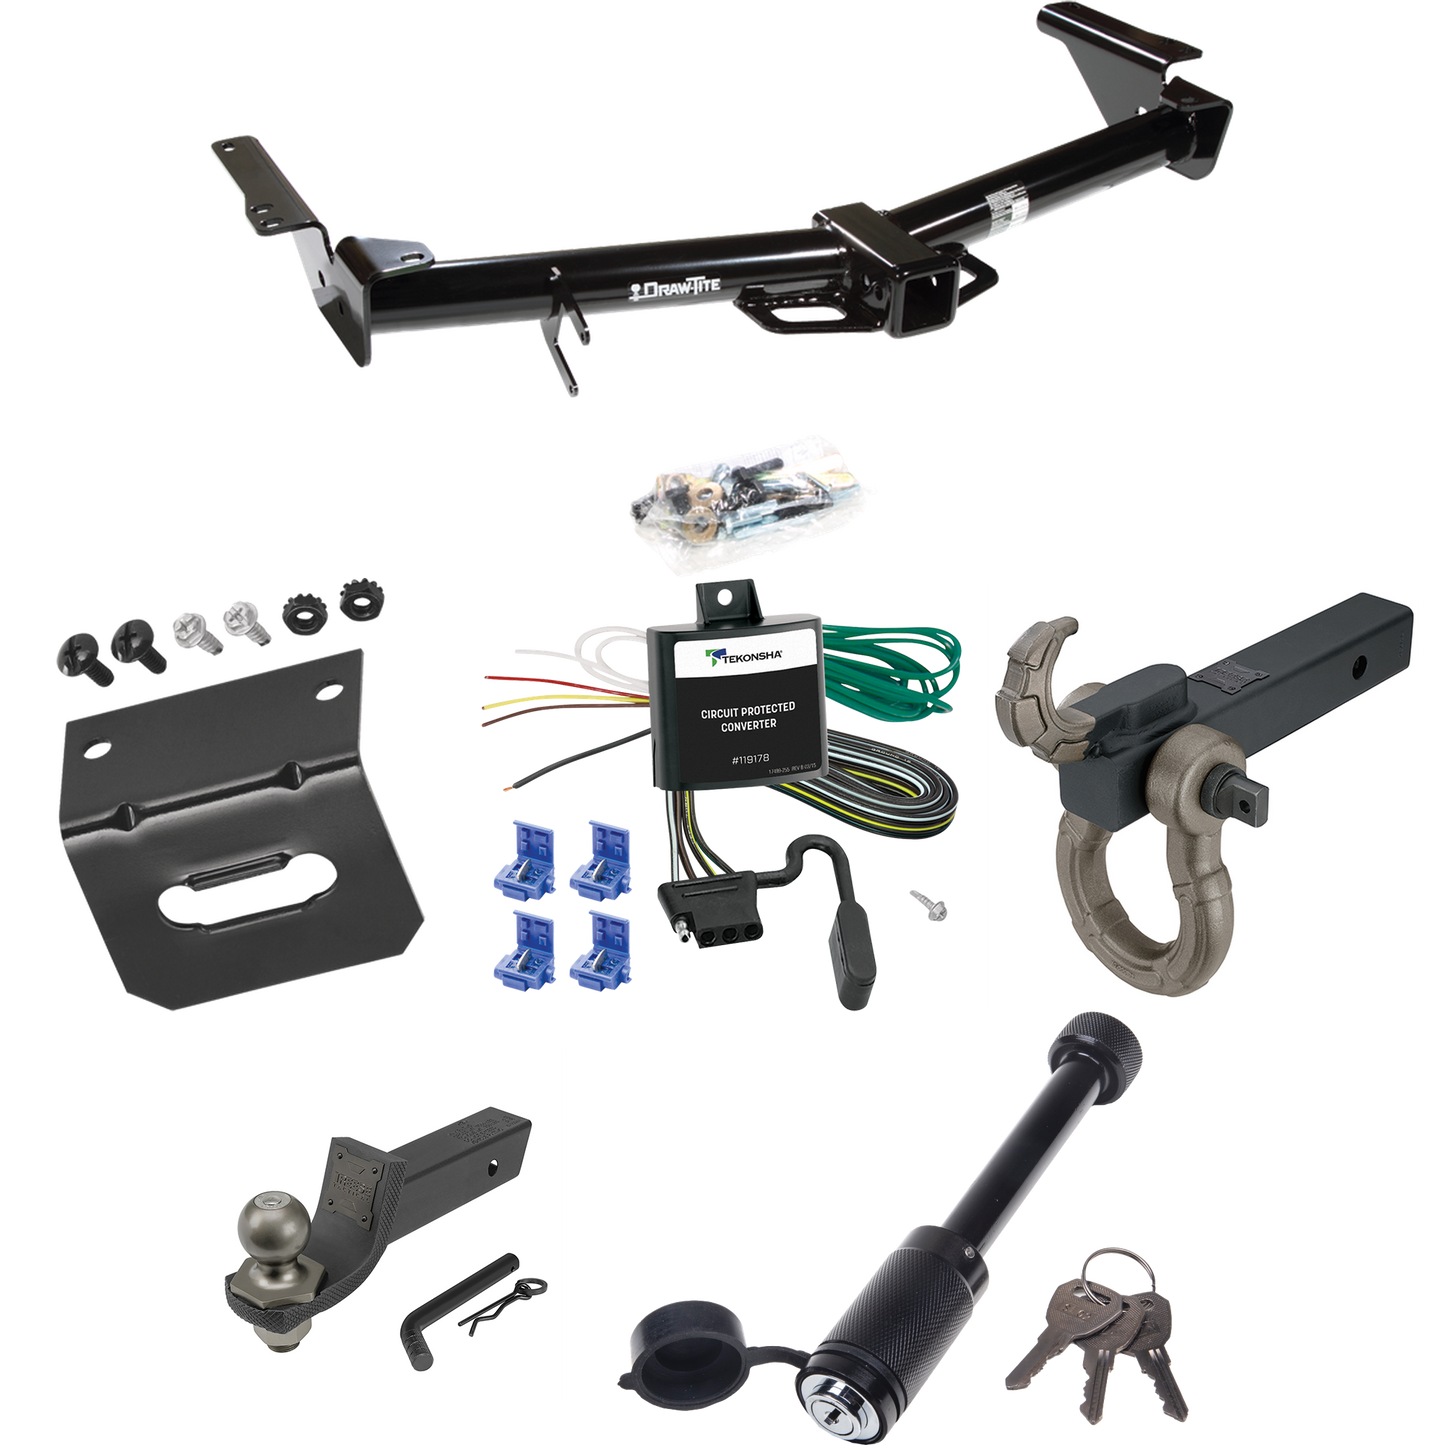 Fits 2003-2006 Toyota 4Runner Trailer Hitch Tow PKG w/ 4-Flat Wiring + Interlock Tactical Starter Kit w/ 2" Drop & 2" Ball + Tactical Hook & Shackle Mount + Tactical Dogbone Lock + Wiring Bracket By Draw-Tite